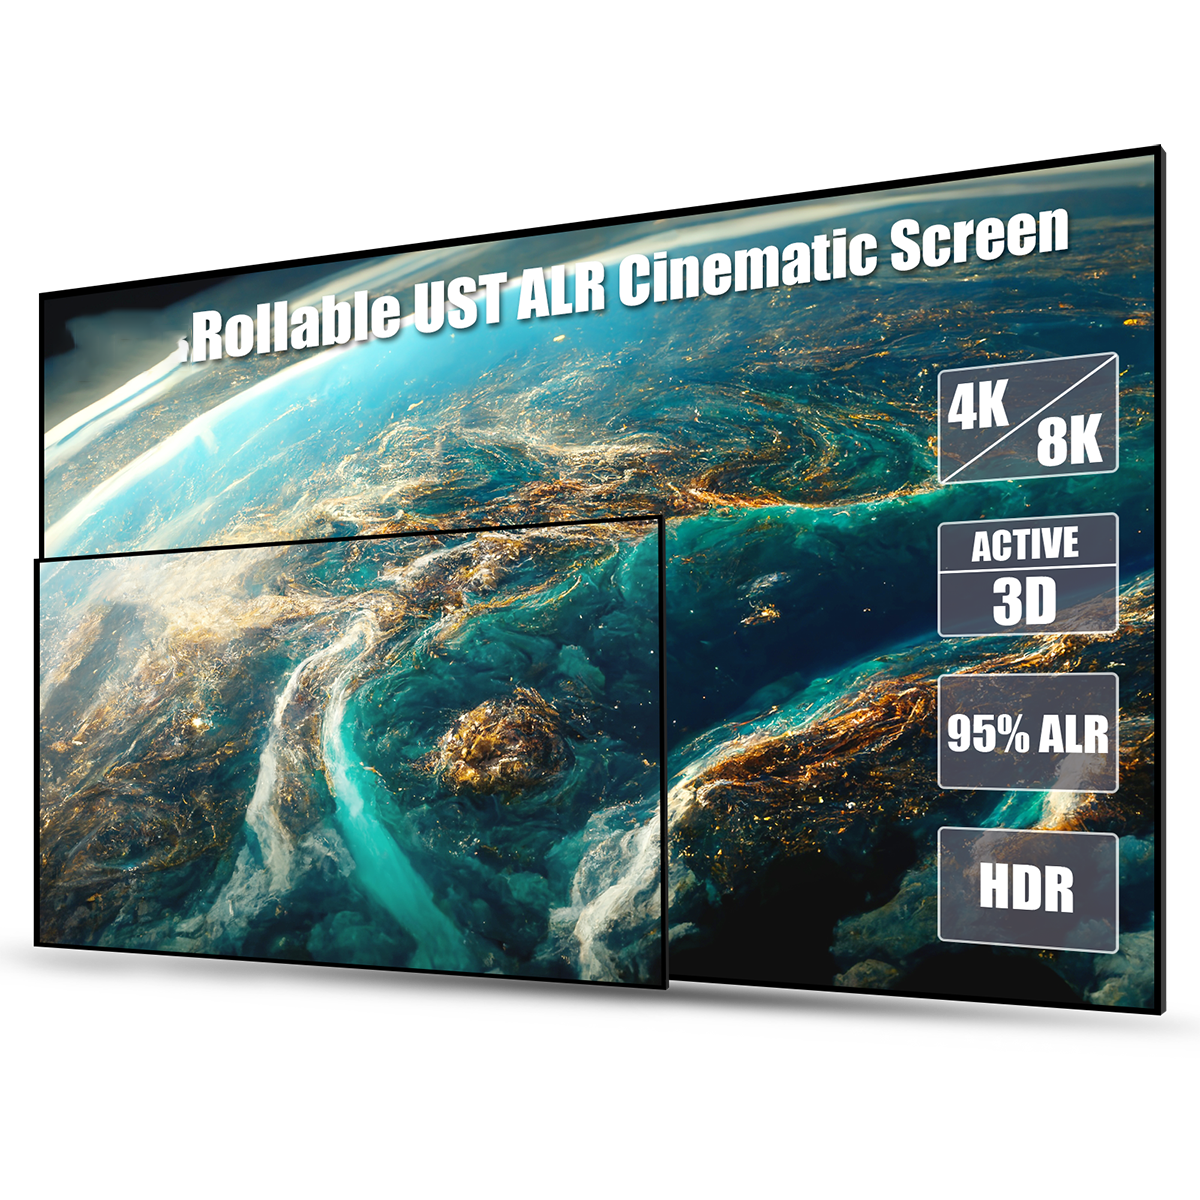 best price,awol,100inch,alr,projector,cinematic,screen,ust,eu,discount